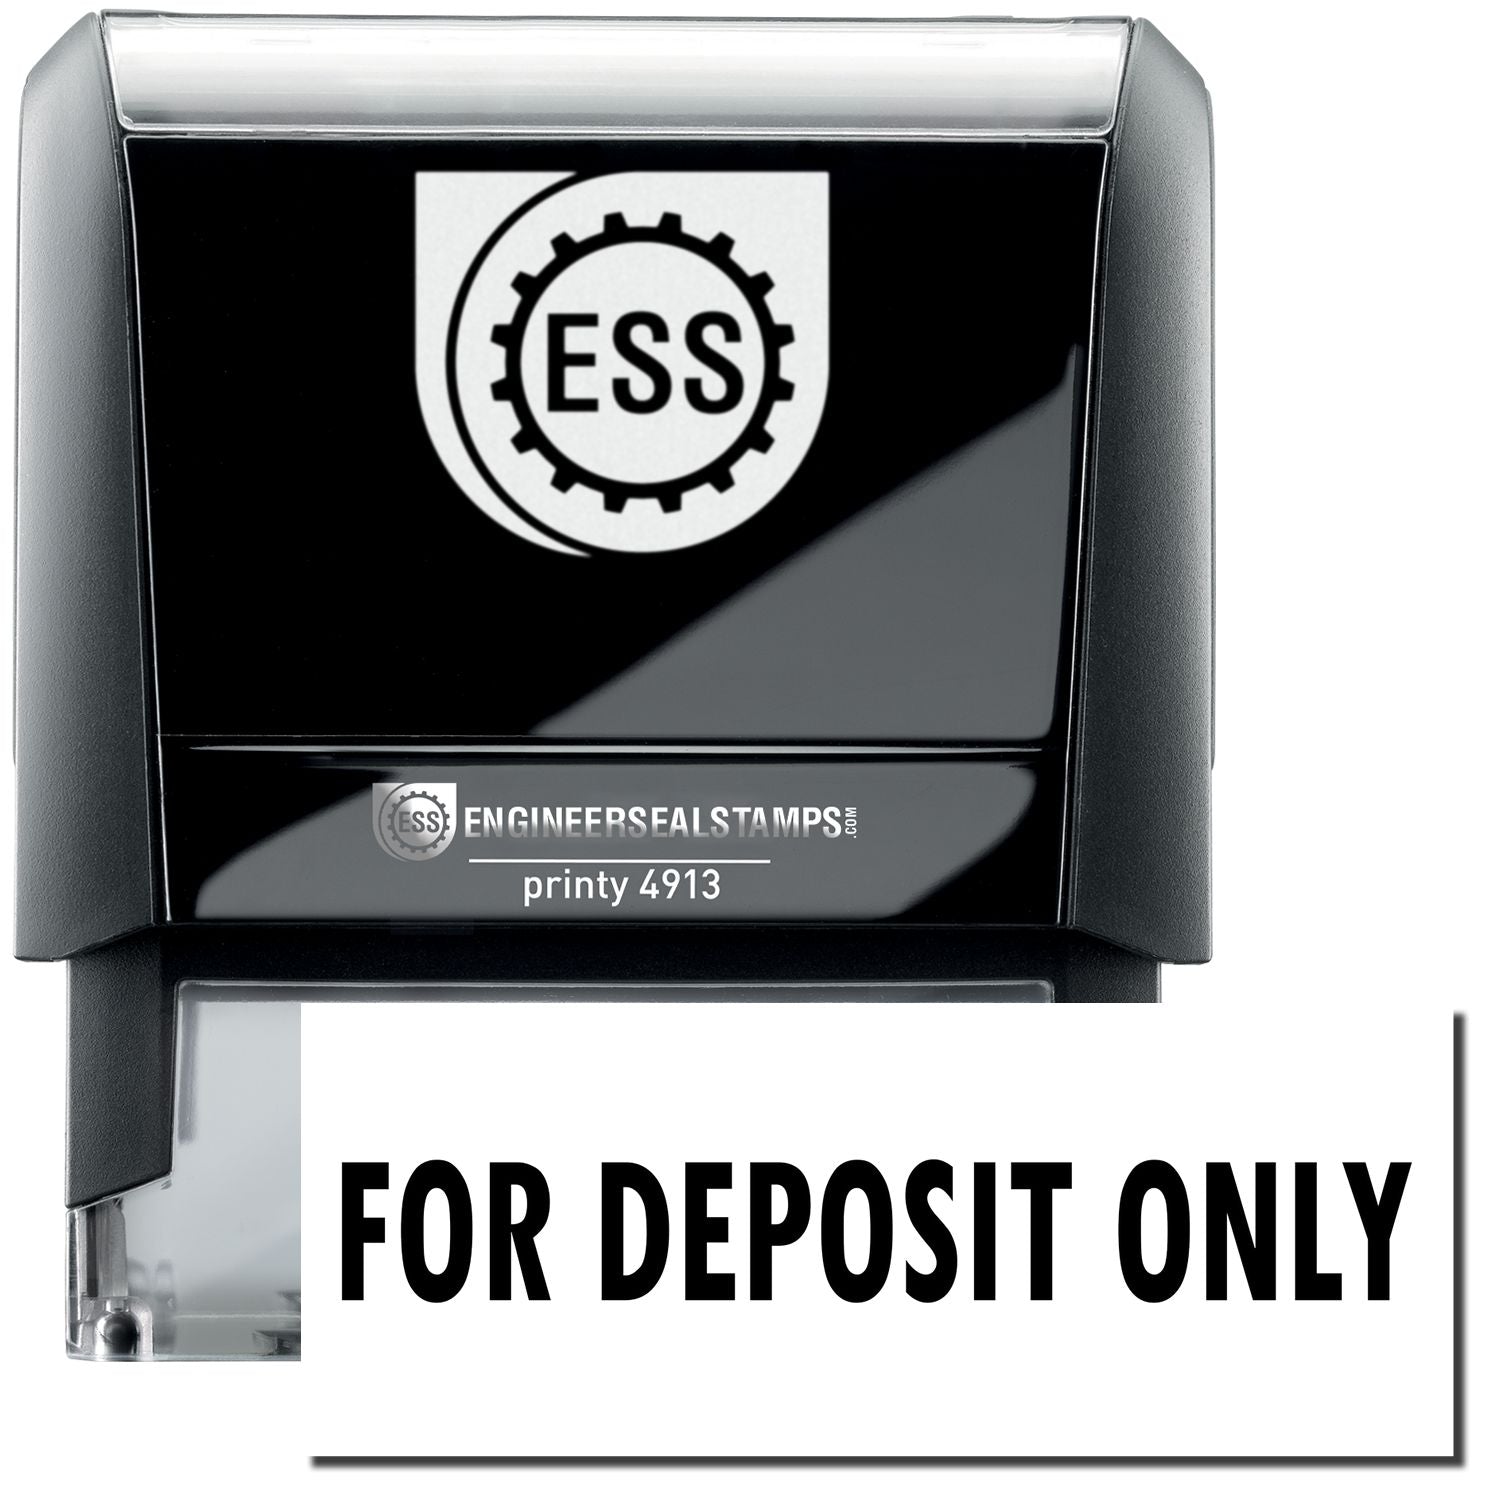 A self-inking stamp with a stamped image showing how the text "FOR DEPOSIT ONLY" in a large bold font is displayed by it.